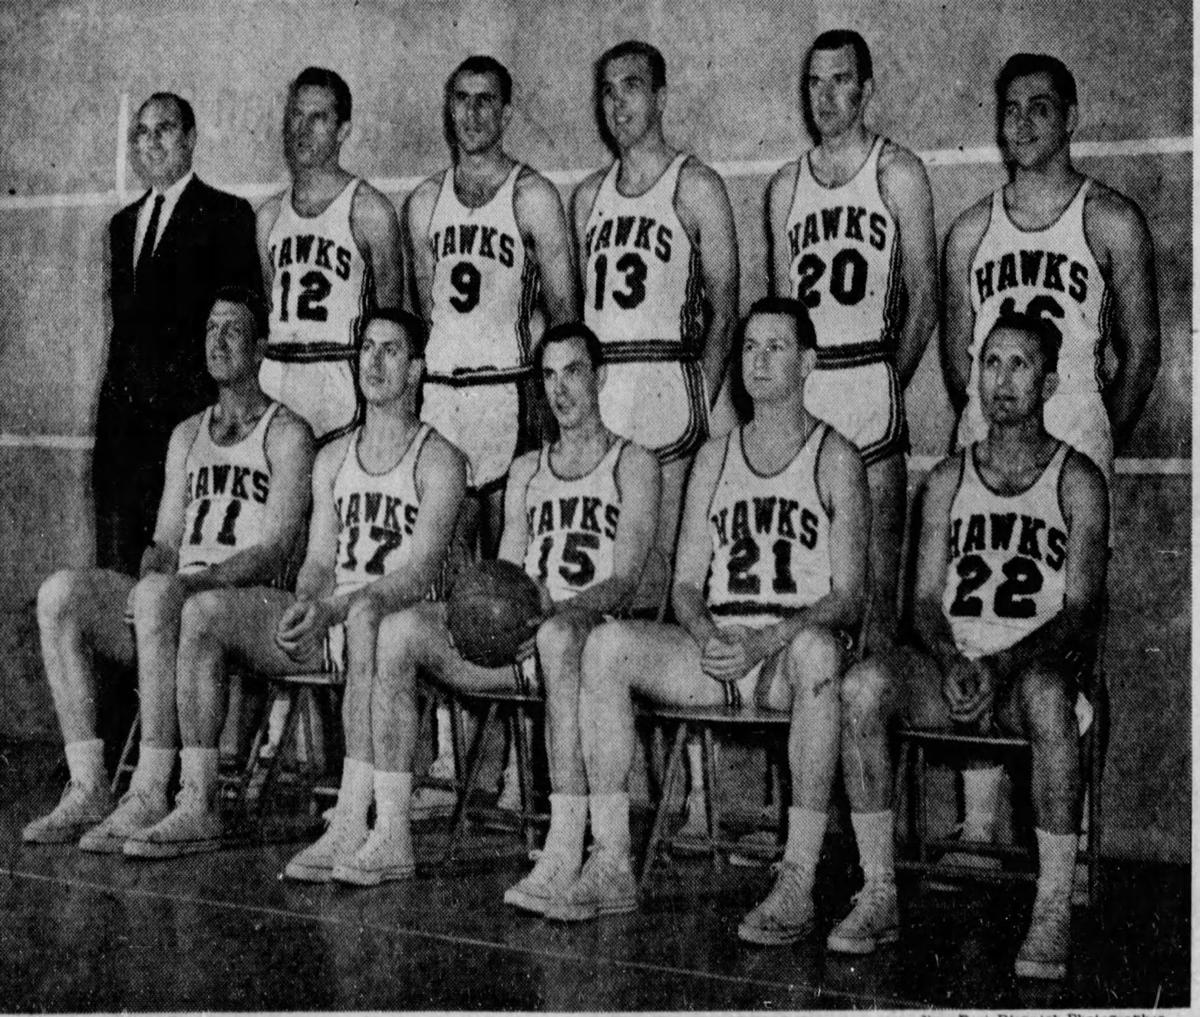 The night Bob Pettit scored 50 and gave St. Louis its only NBA title